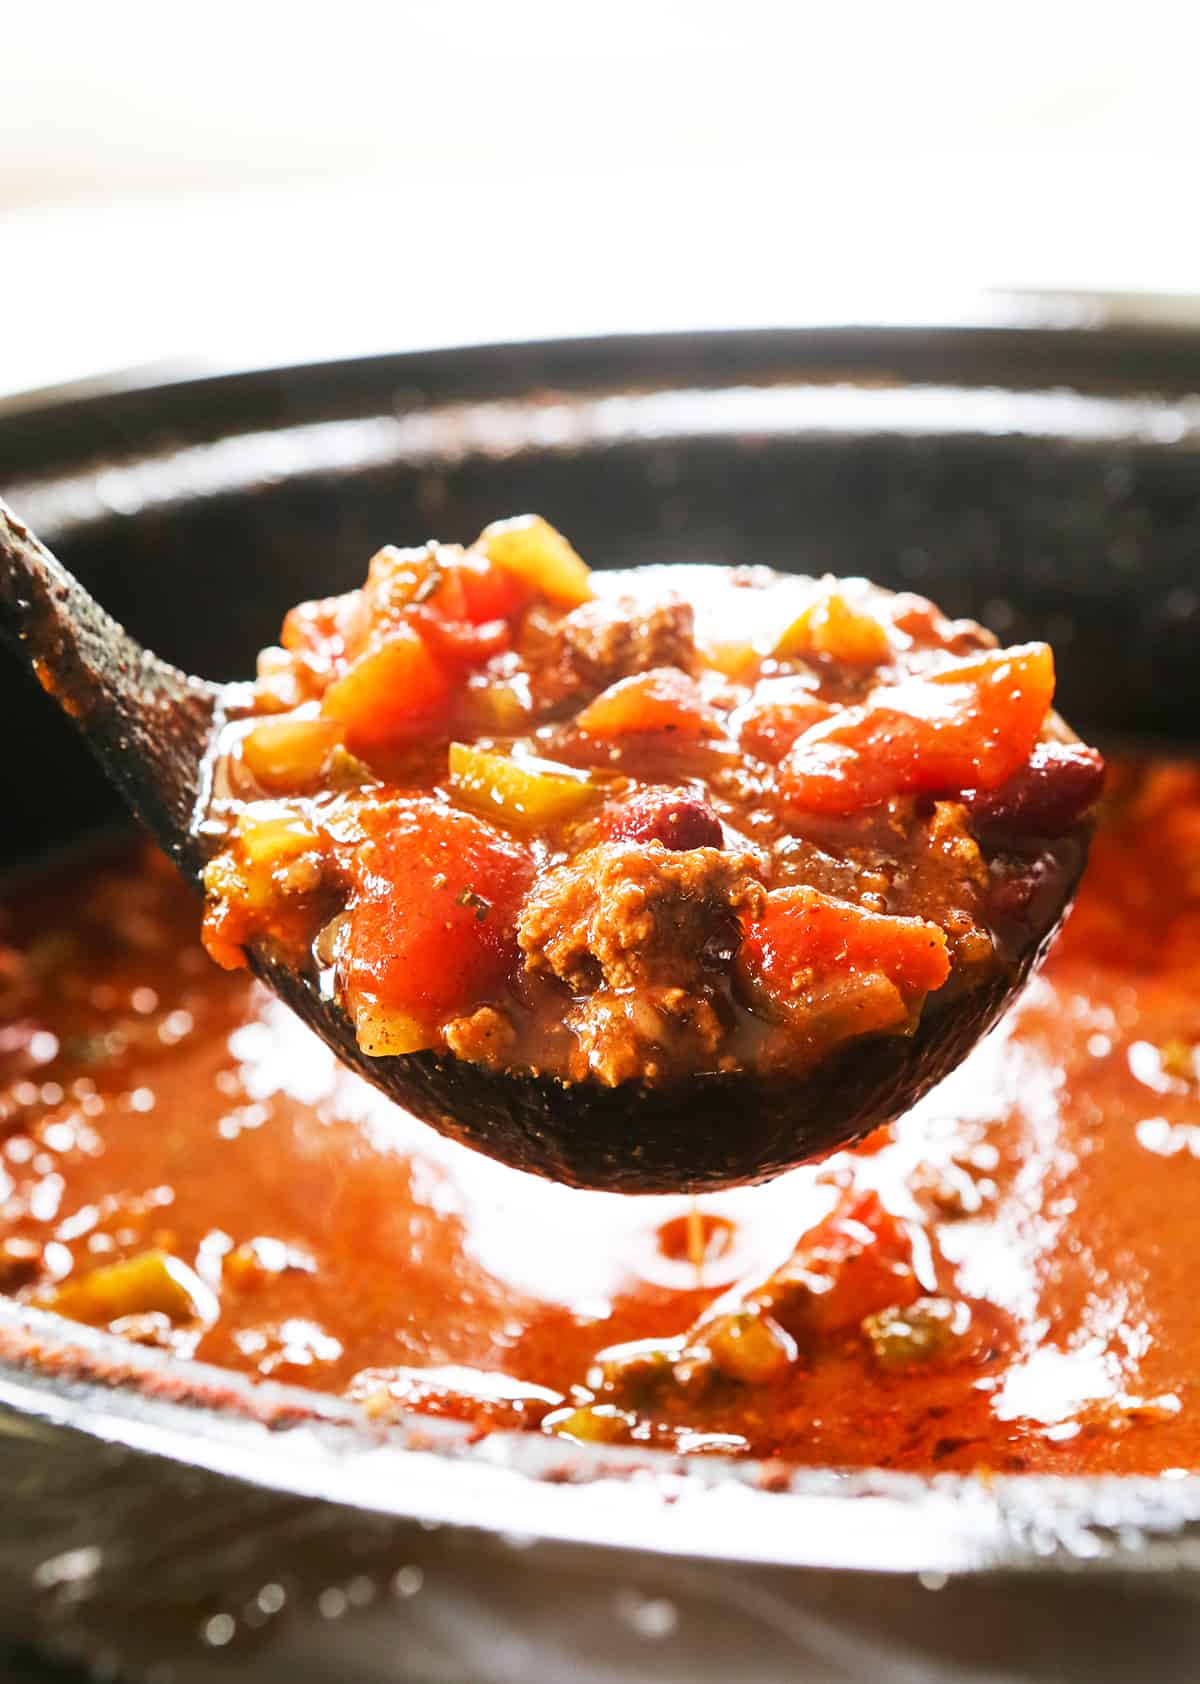 Ladle full of chili recipe hovering over full slow cooker.